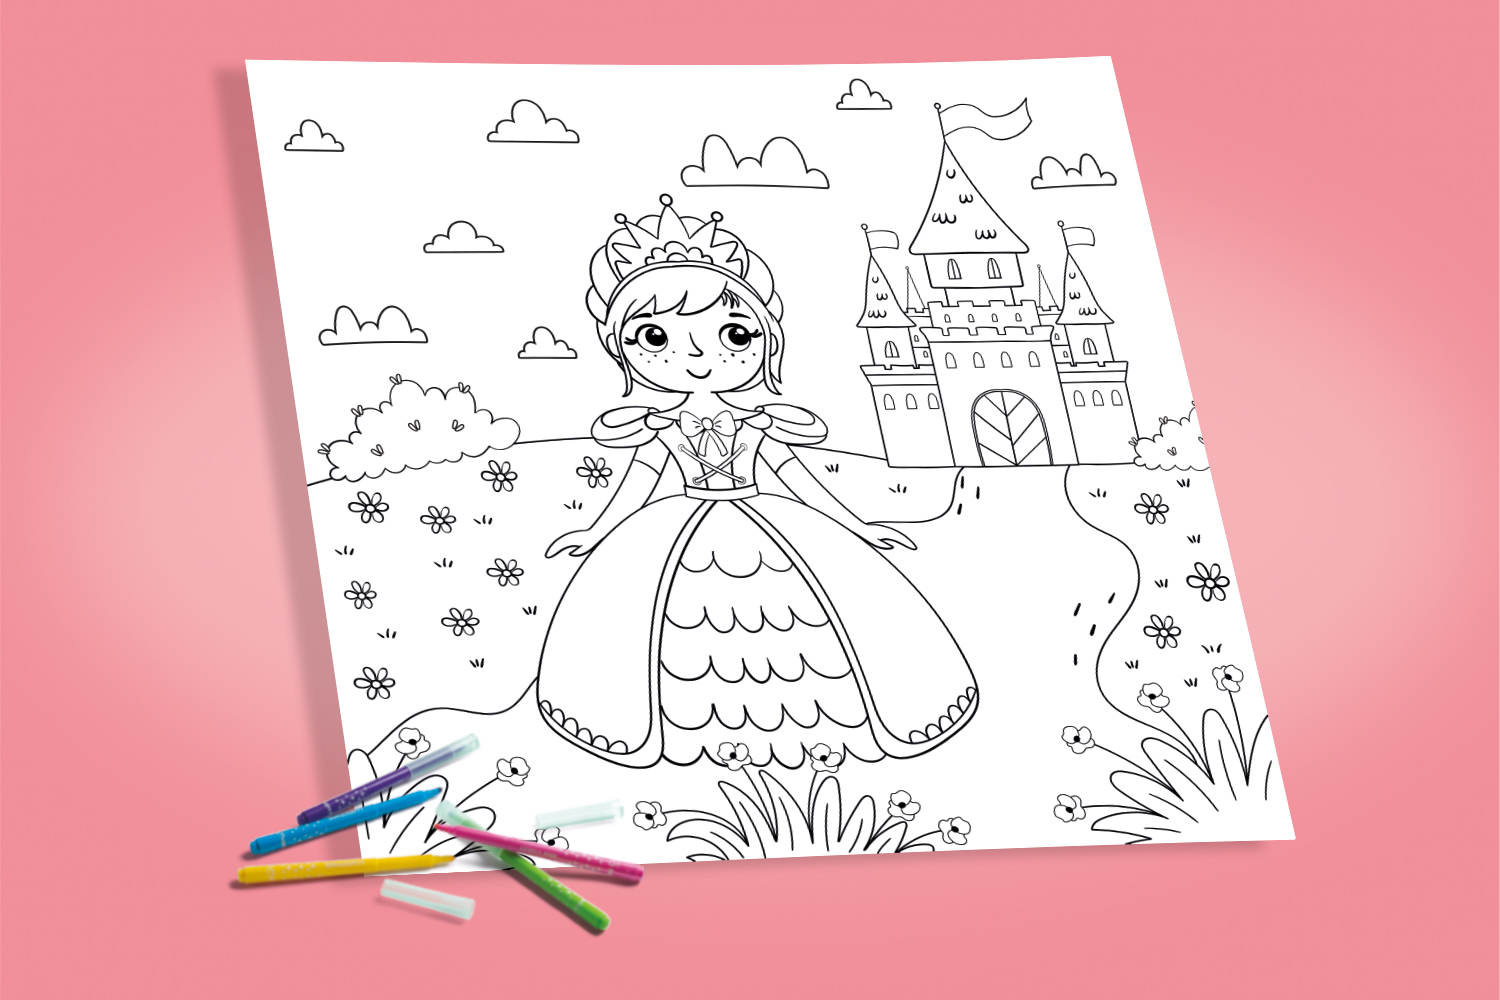 https://mapiwee.com/wp-content/uploads/2023/07/mapiwee-by-maped-coloriage-princesse-et-son-chateau-telecharger-et-imprimer-1500x1000-1.jpg